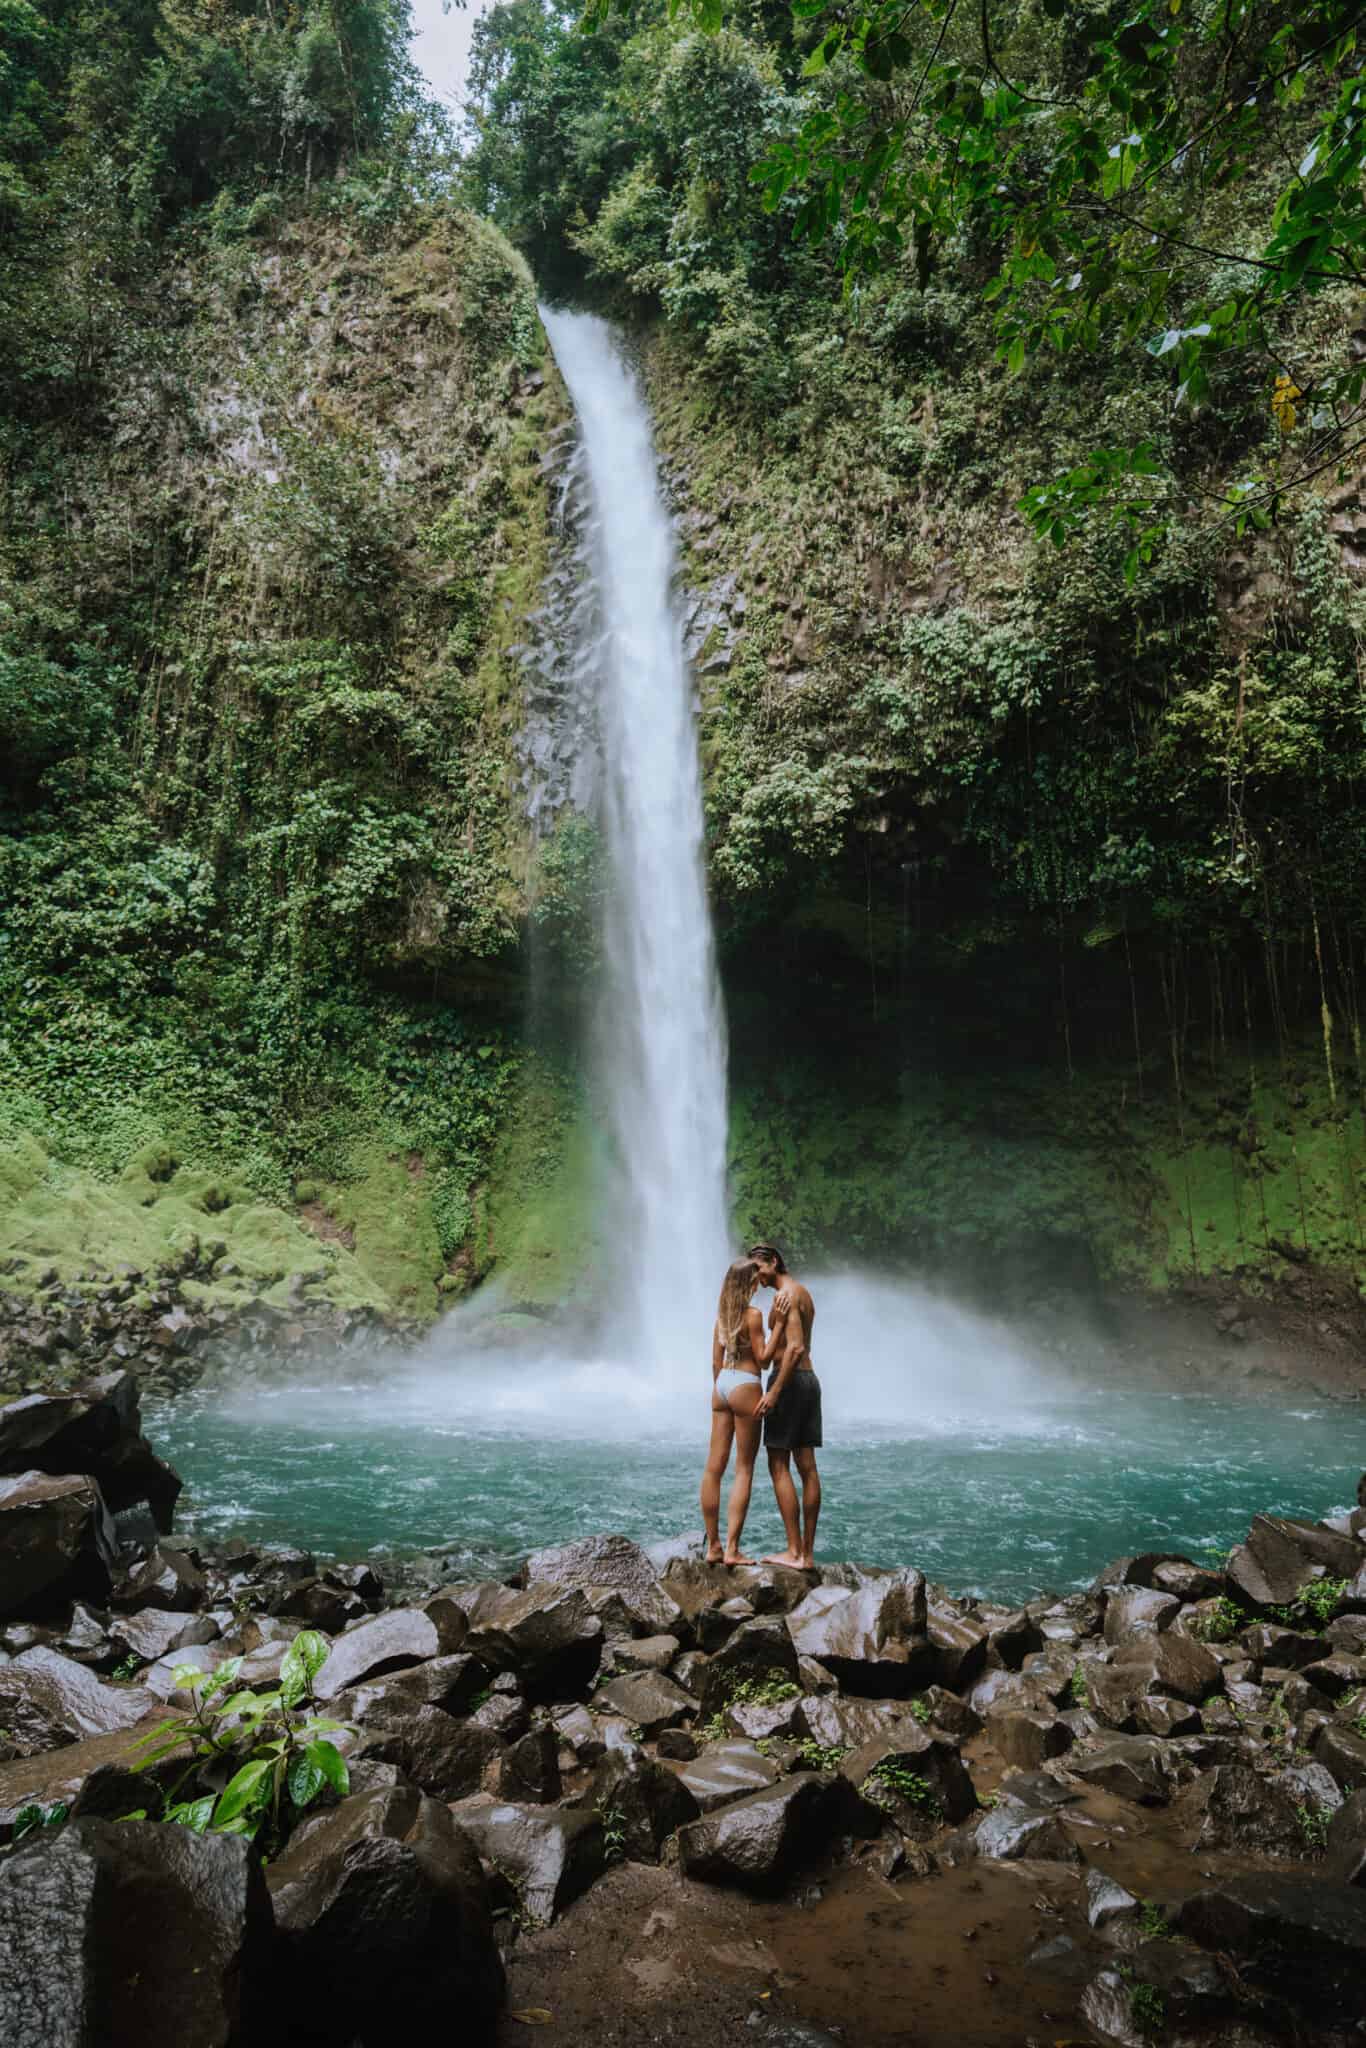 A couple admiring a waterfall in Costa Rica.